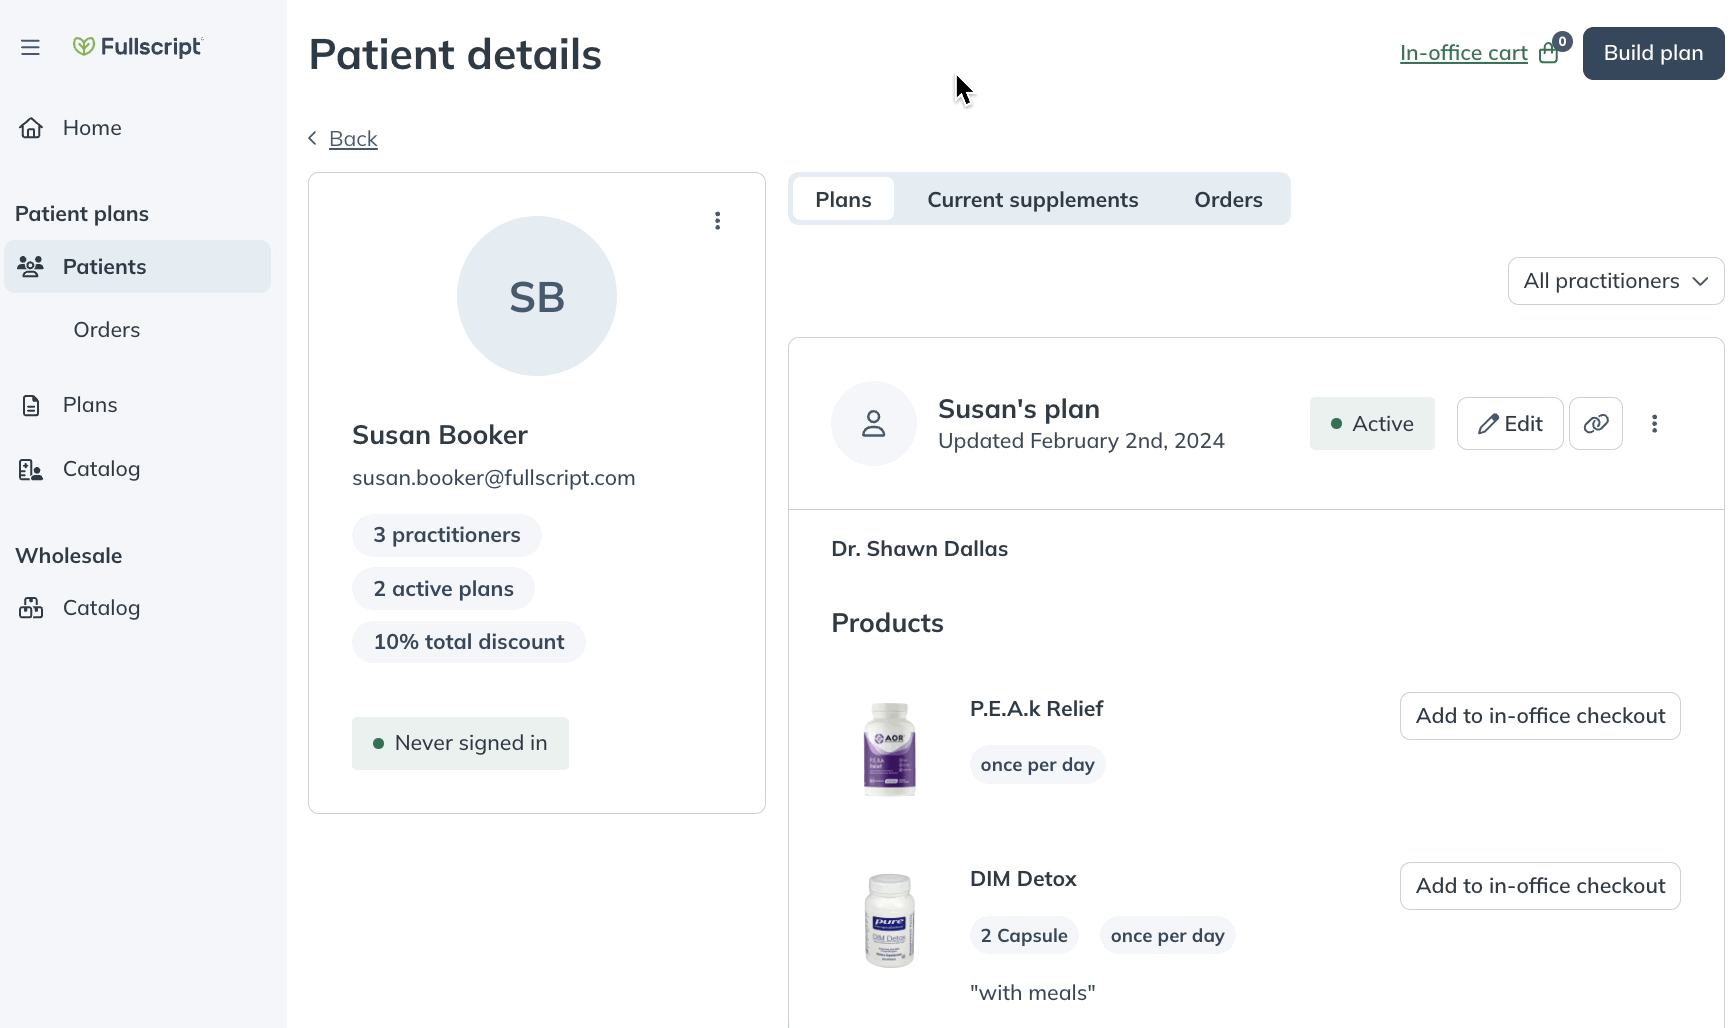 Adding a product to the in-office cart